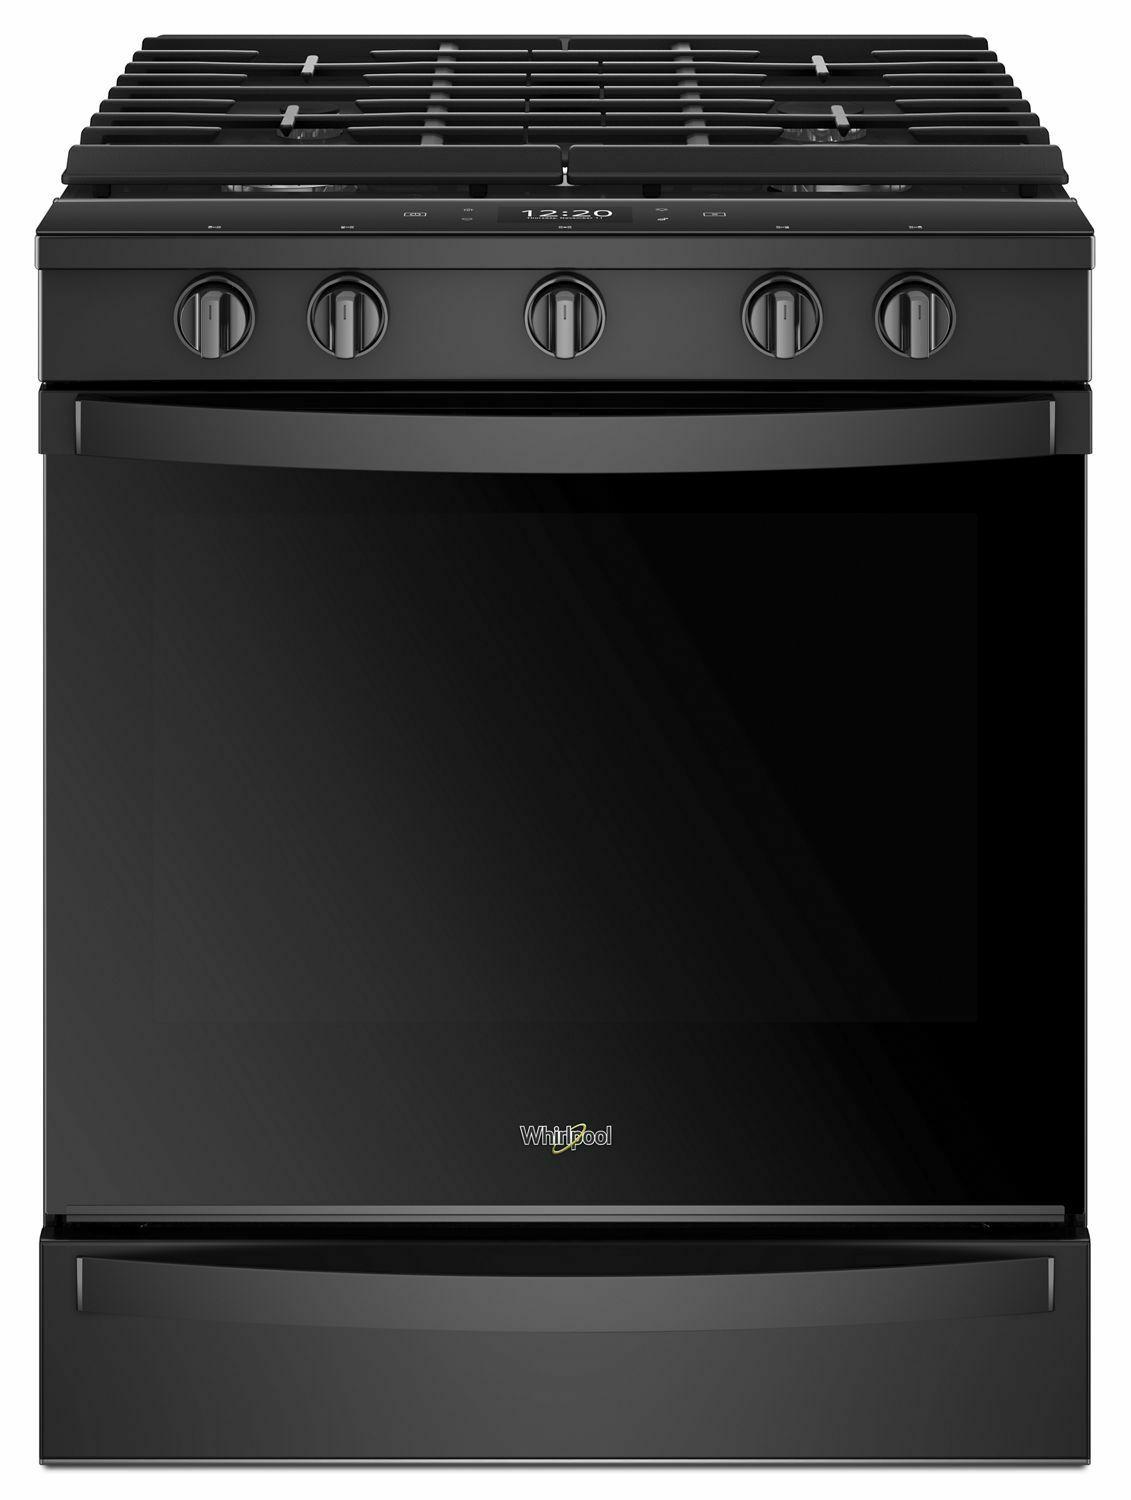 Whirlpool 5.8 cu. ft. Smart Slide-in Gas Range with Air Fry, when Connected